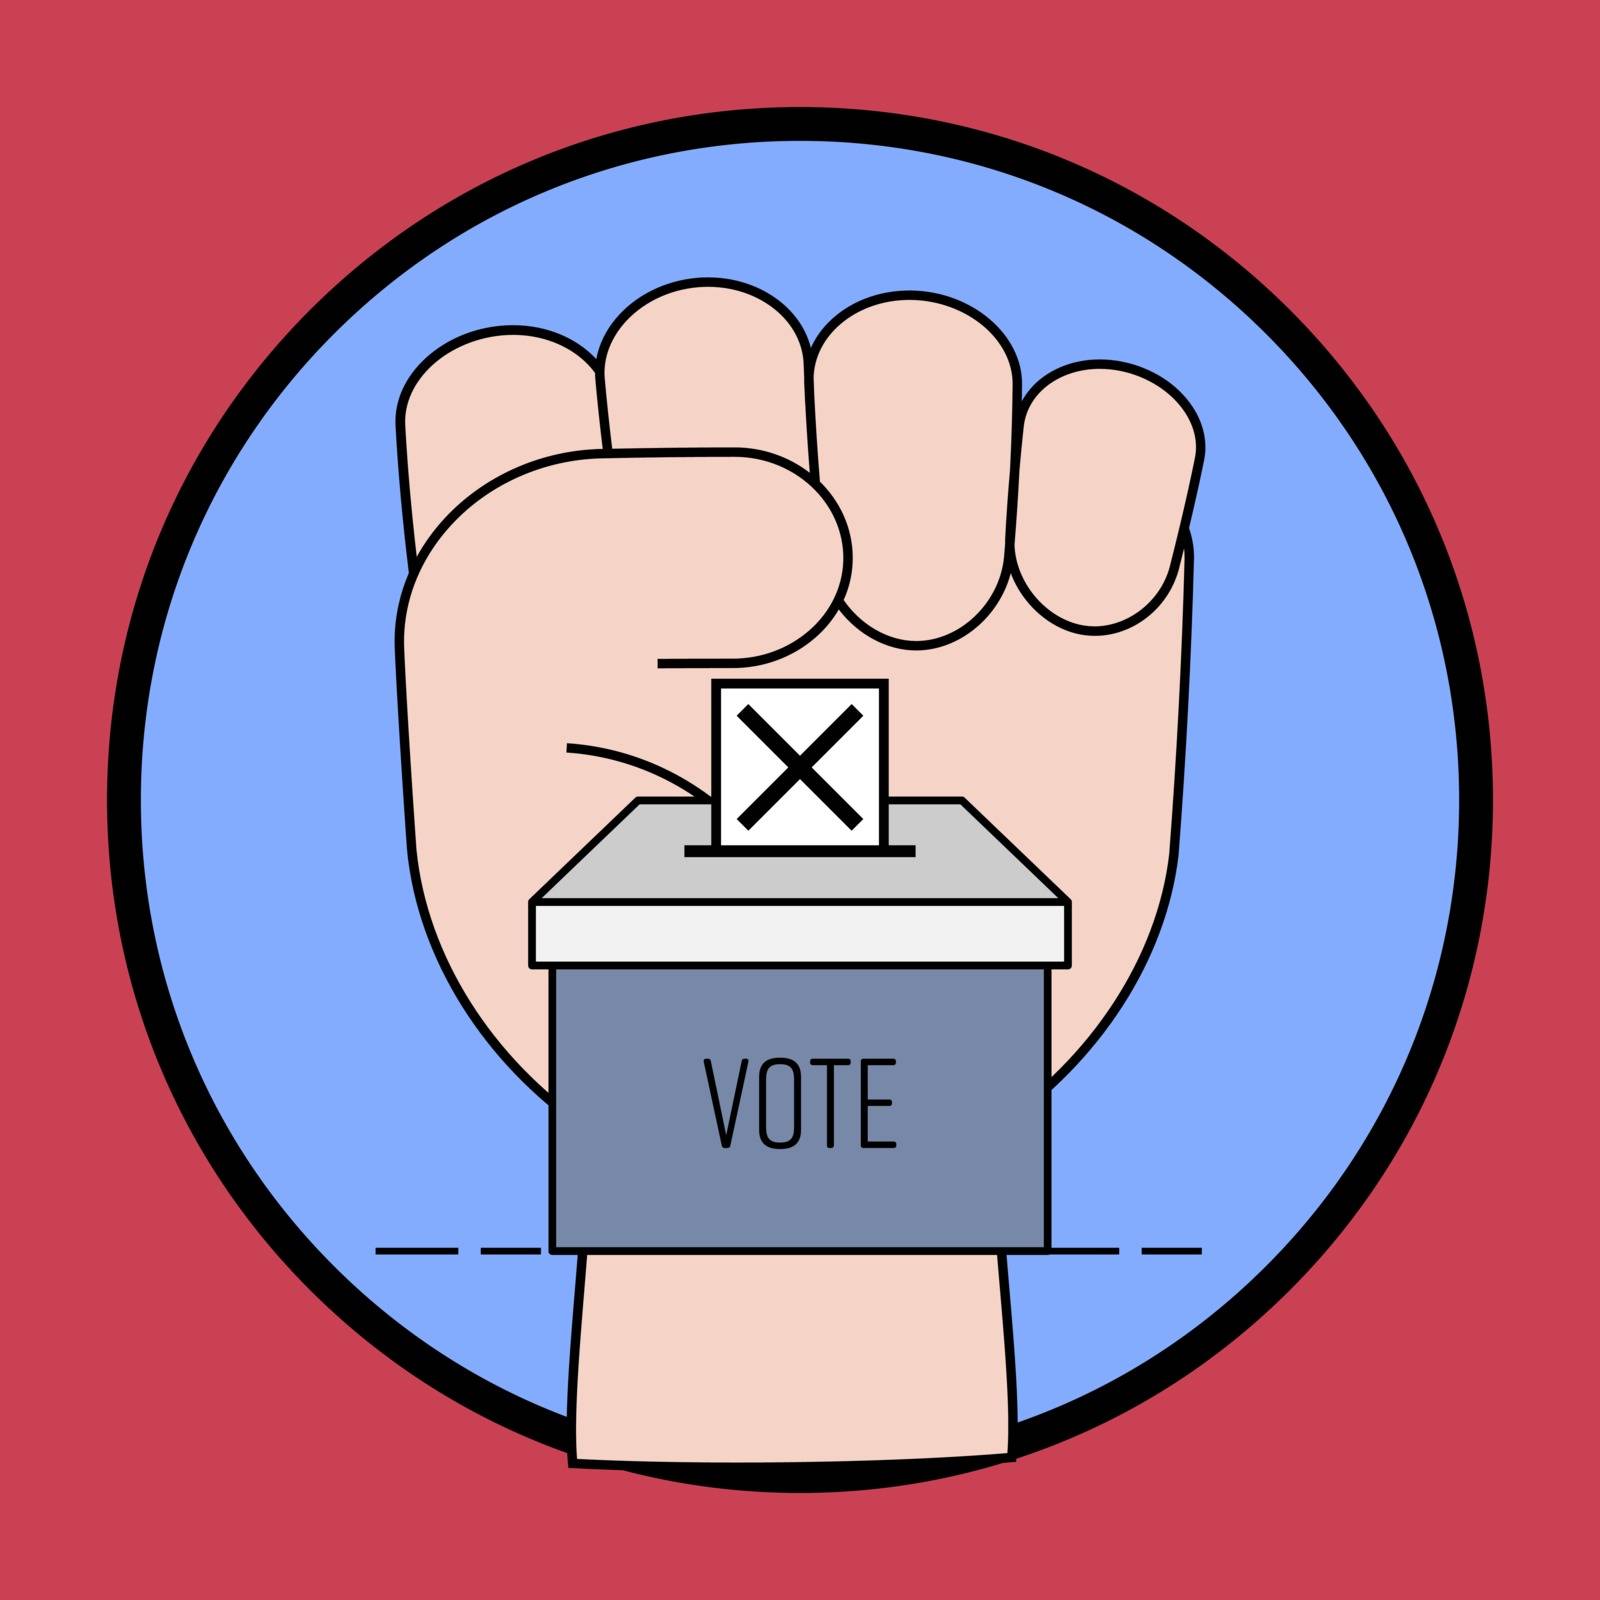 Voting and election concept. Political participation metaphor. Political right to vote. Symbol of election campaign. Vector illustration concept outline flat design style.